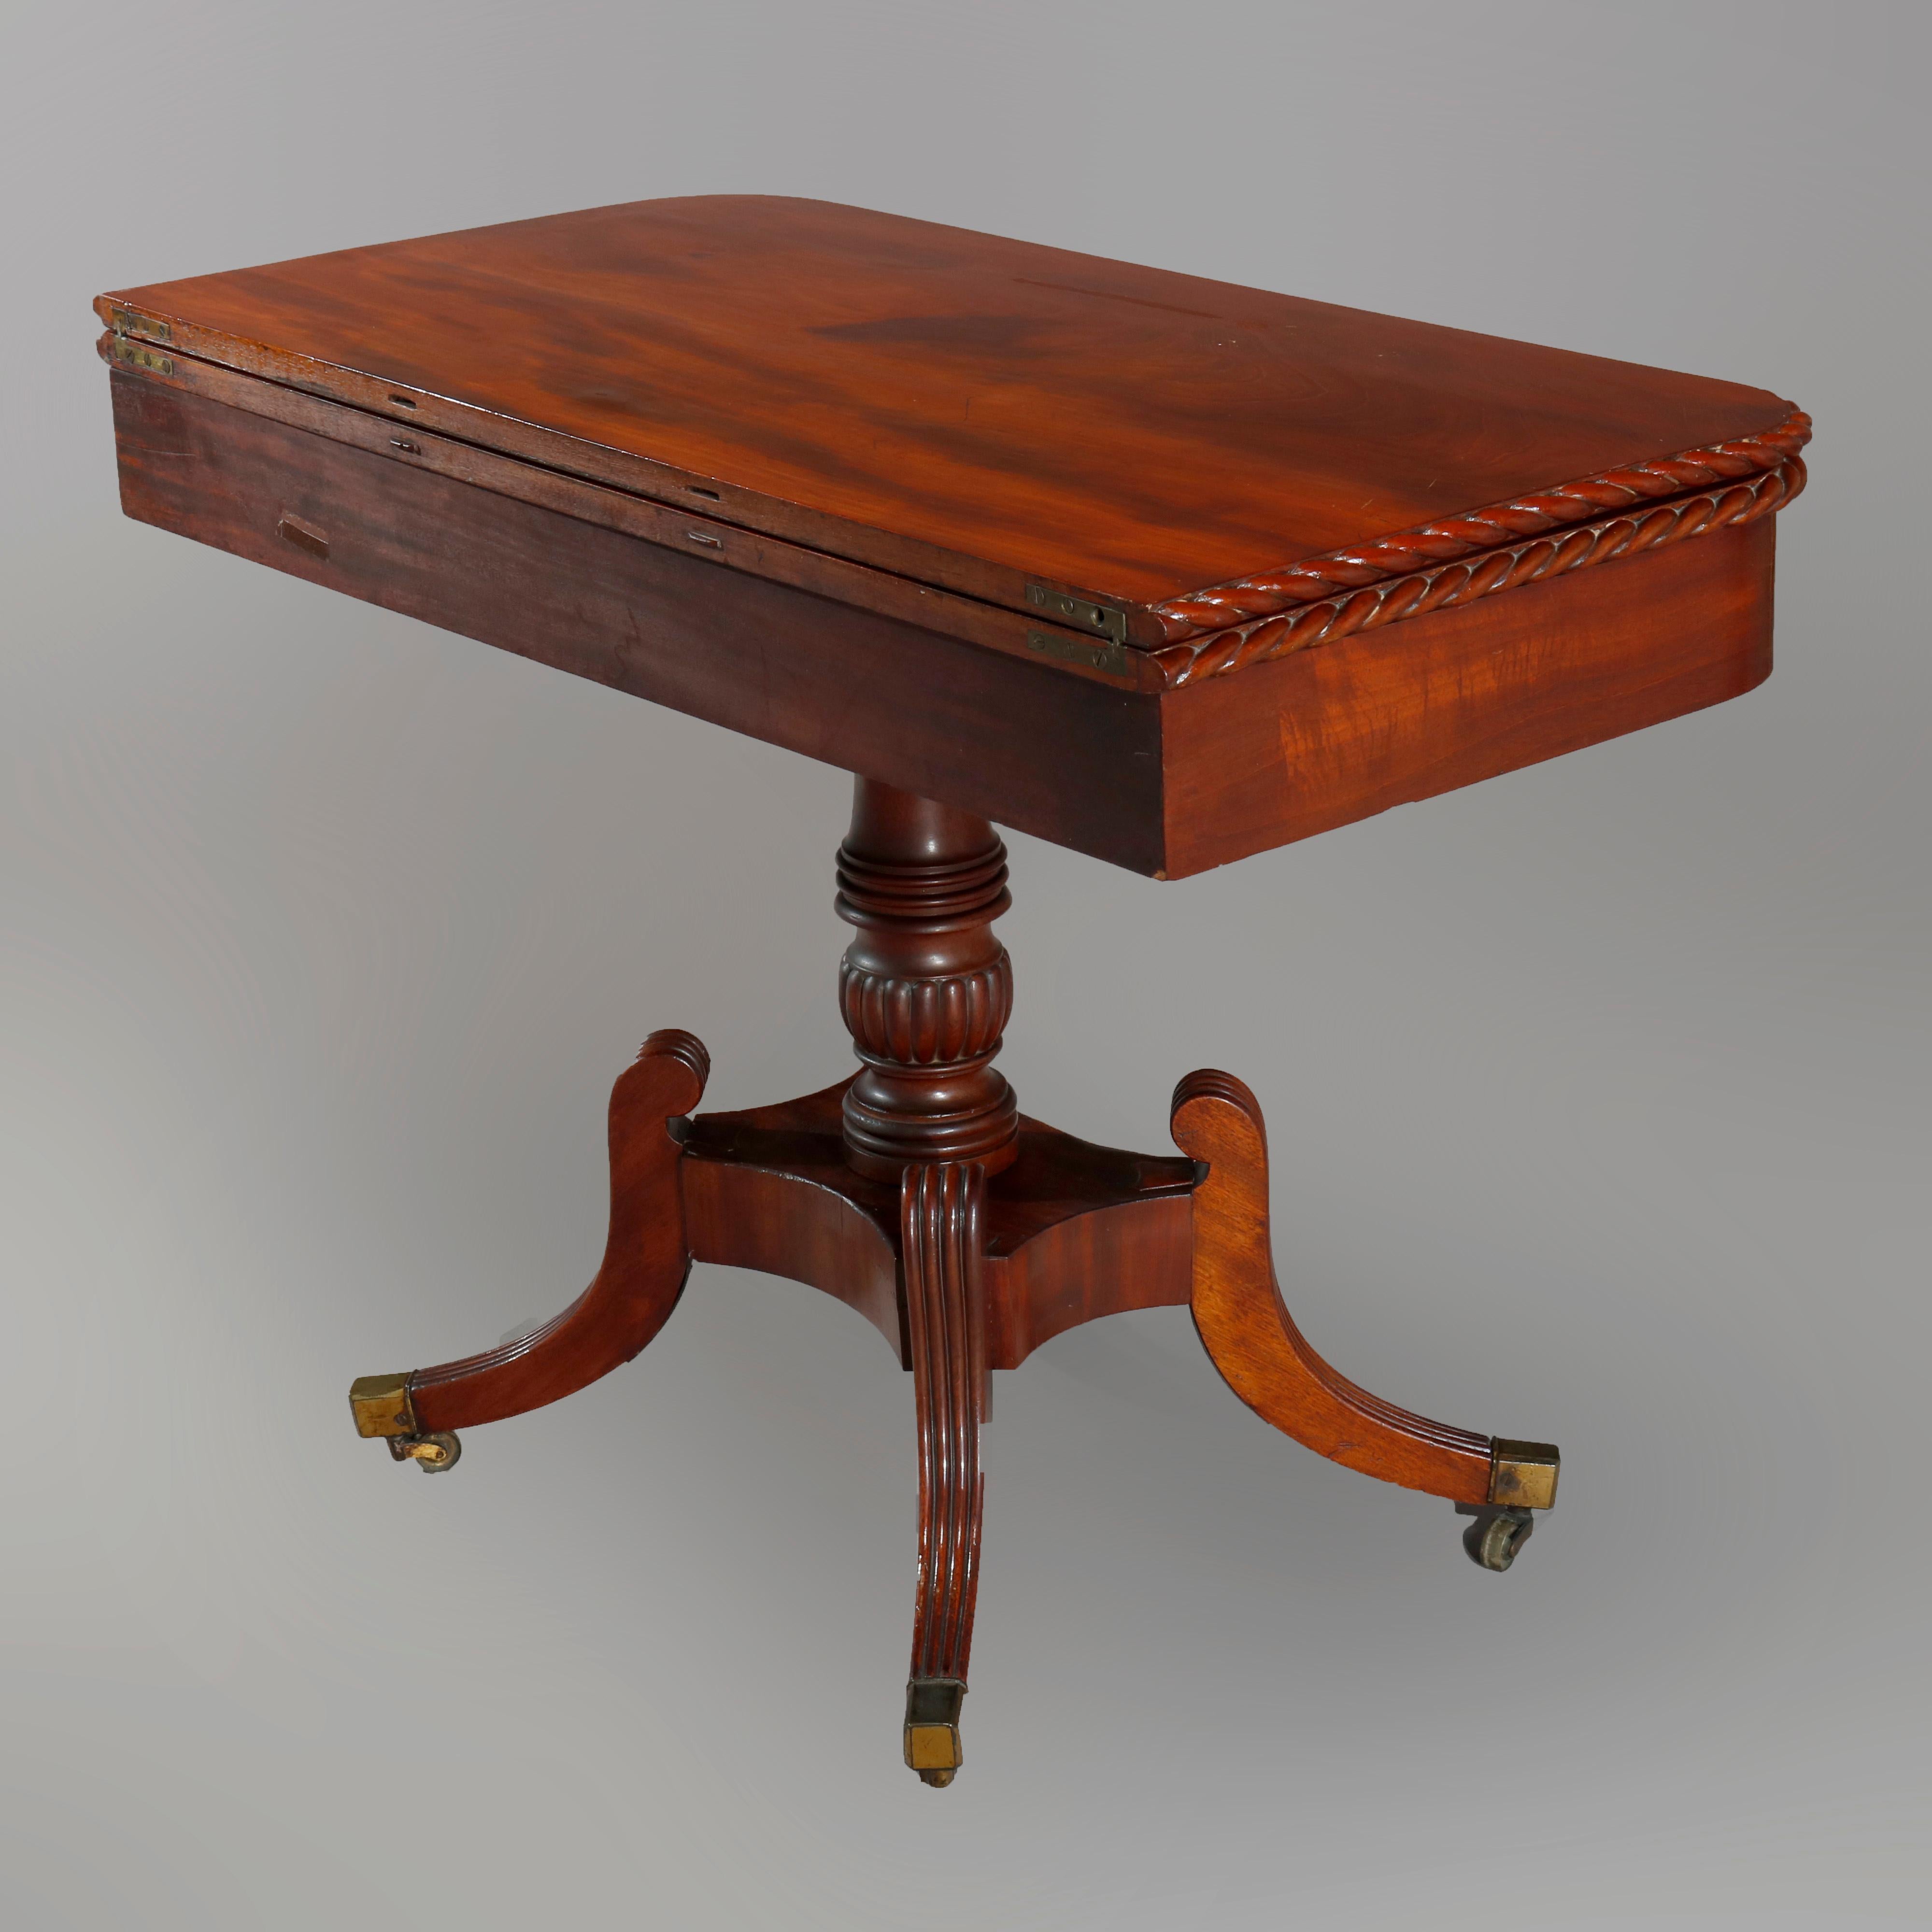 An antique matching pair of Federal game tables offer flame mahogany construction with rope twist edge over deep skirt raised on balustrade columns with quadruped splayed legs terminating in bronze caps with casters, c1820.

Measures: 29.5